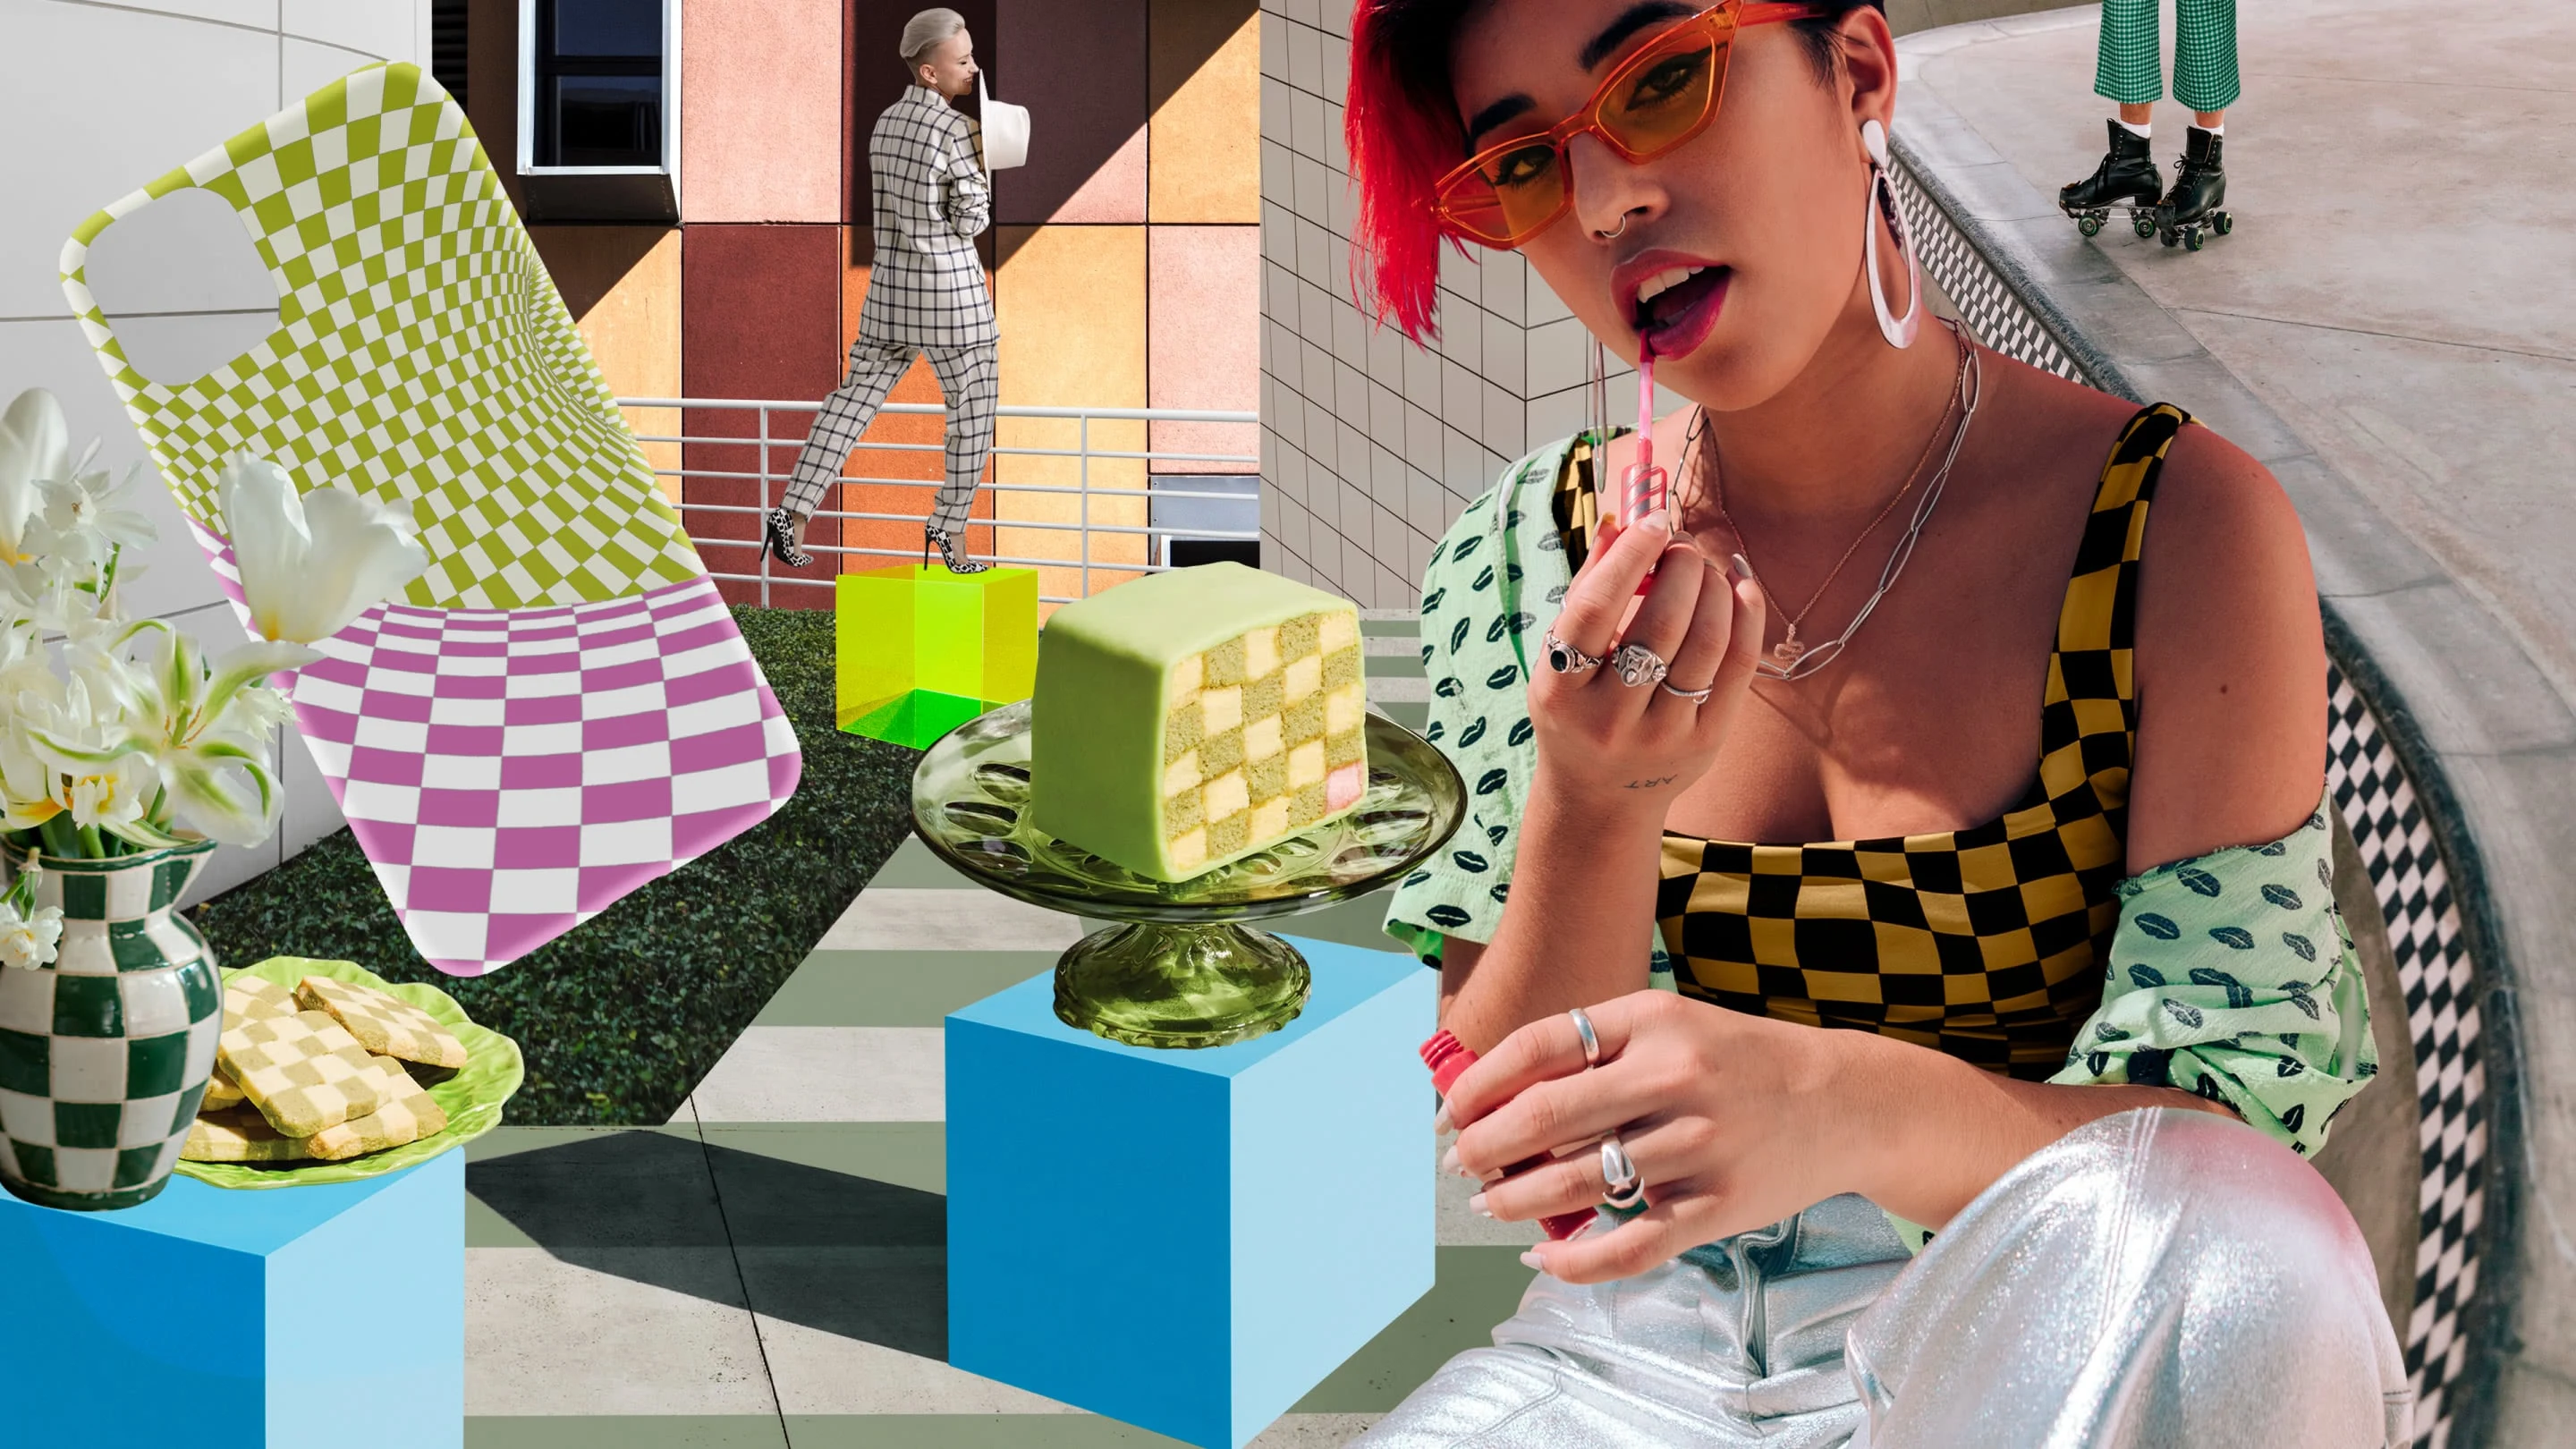 Collage of checkered items. Large cellphone case, piece of green and white cake on a platter, cookies, a vase, walls. East Asian woman with short red hair in checkered tank top applies red lip liner.